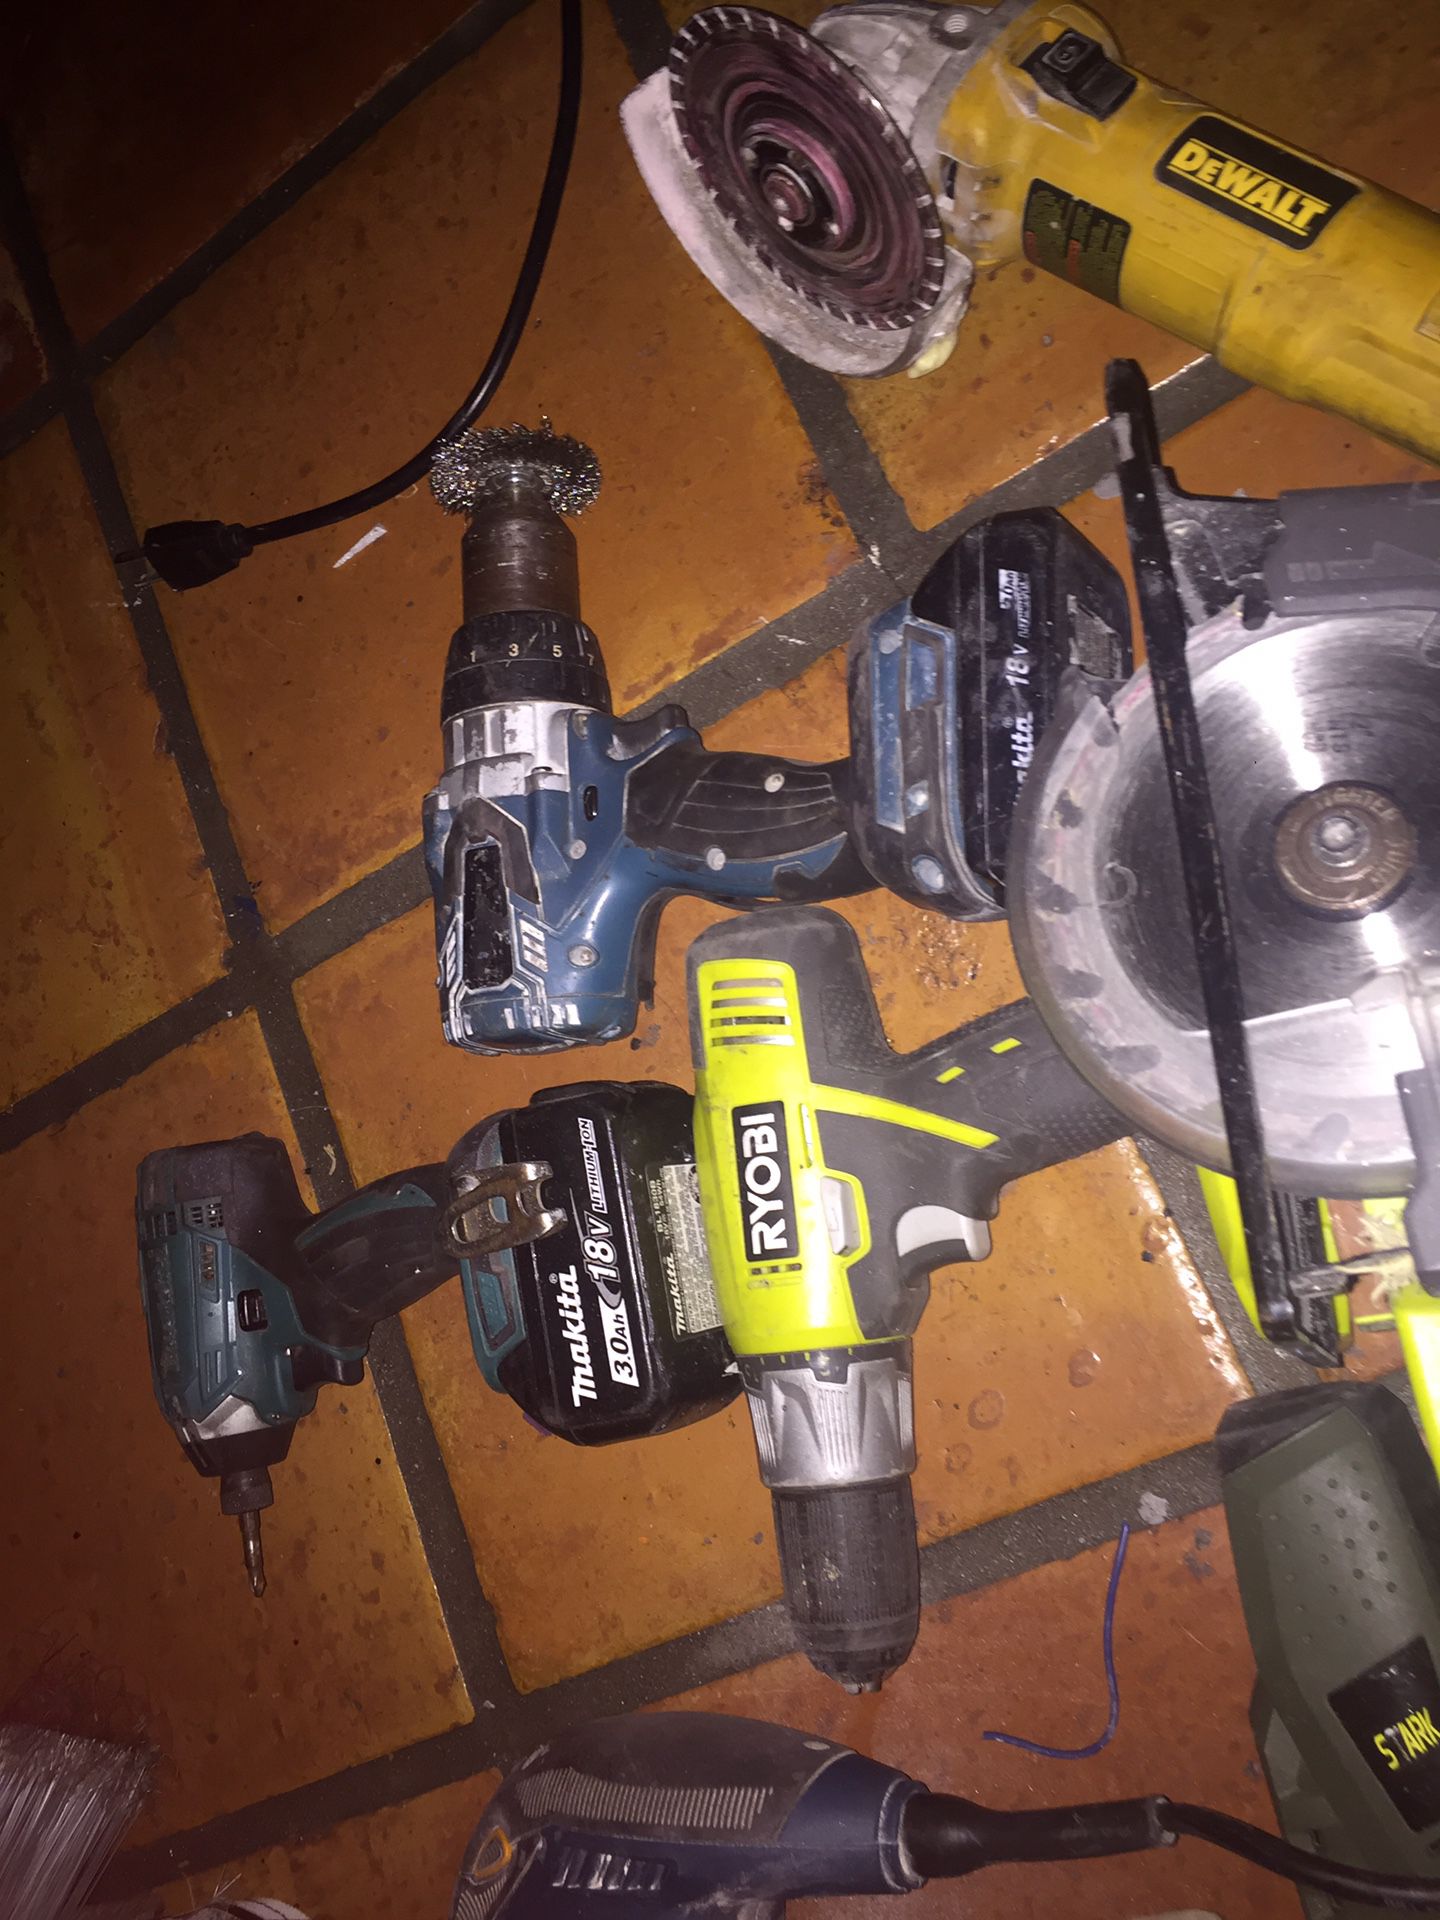 Power tools ... 250 take it all makita impact and drill with charger Ryobi saw with drill two sanders dewalt grinder and power drill stark nail gun